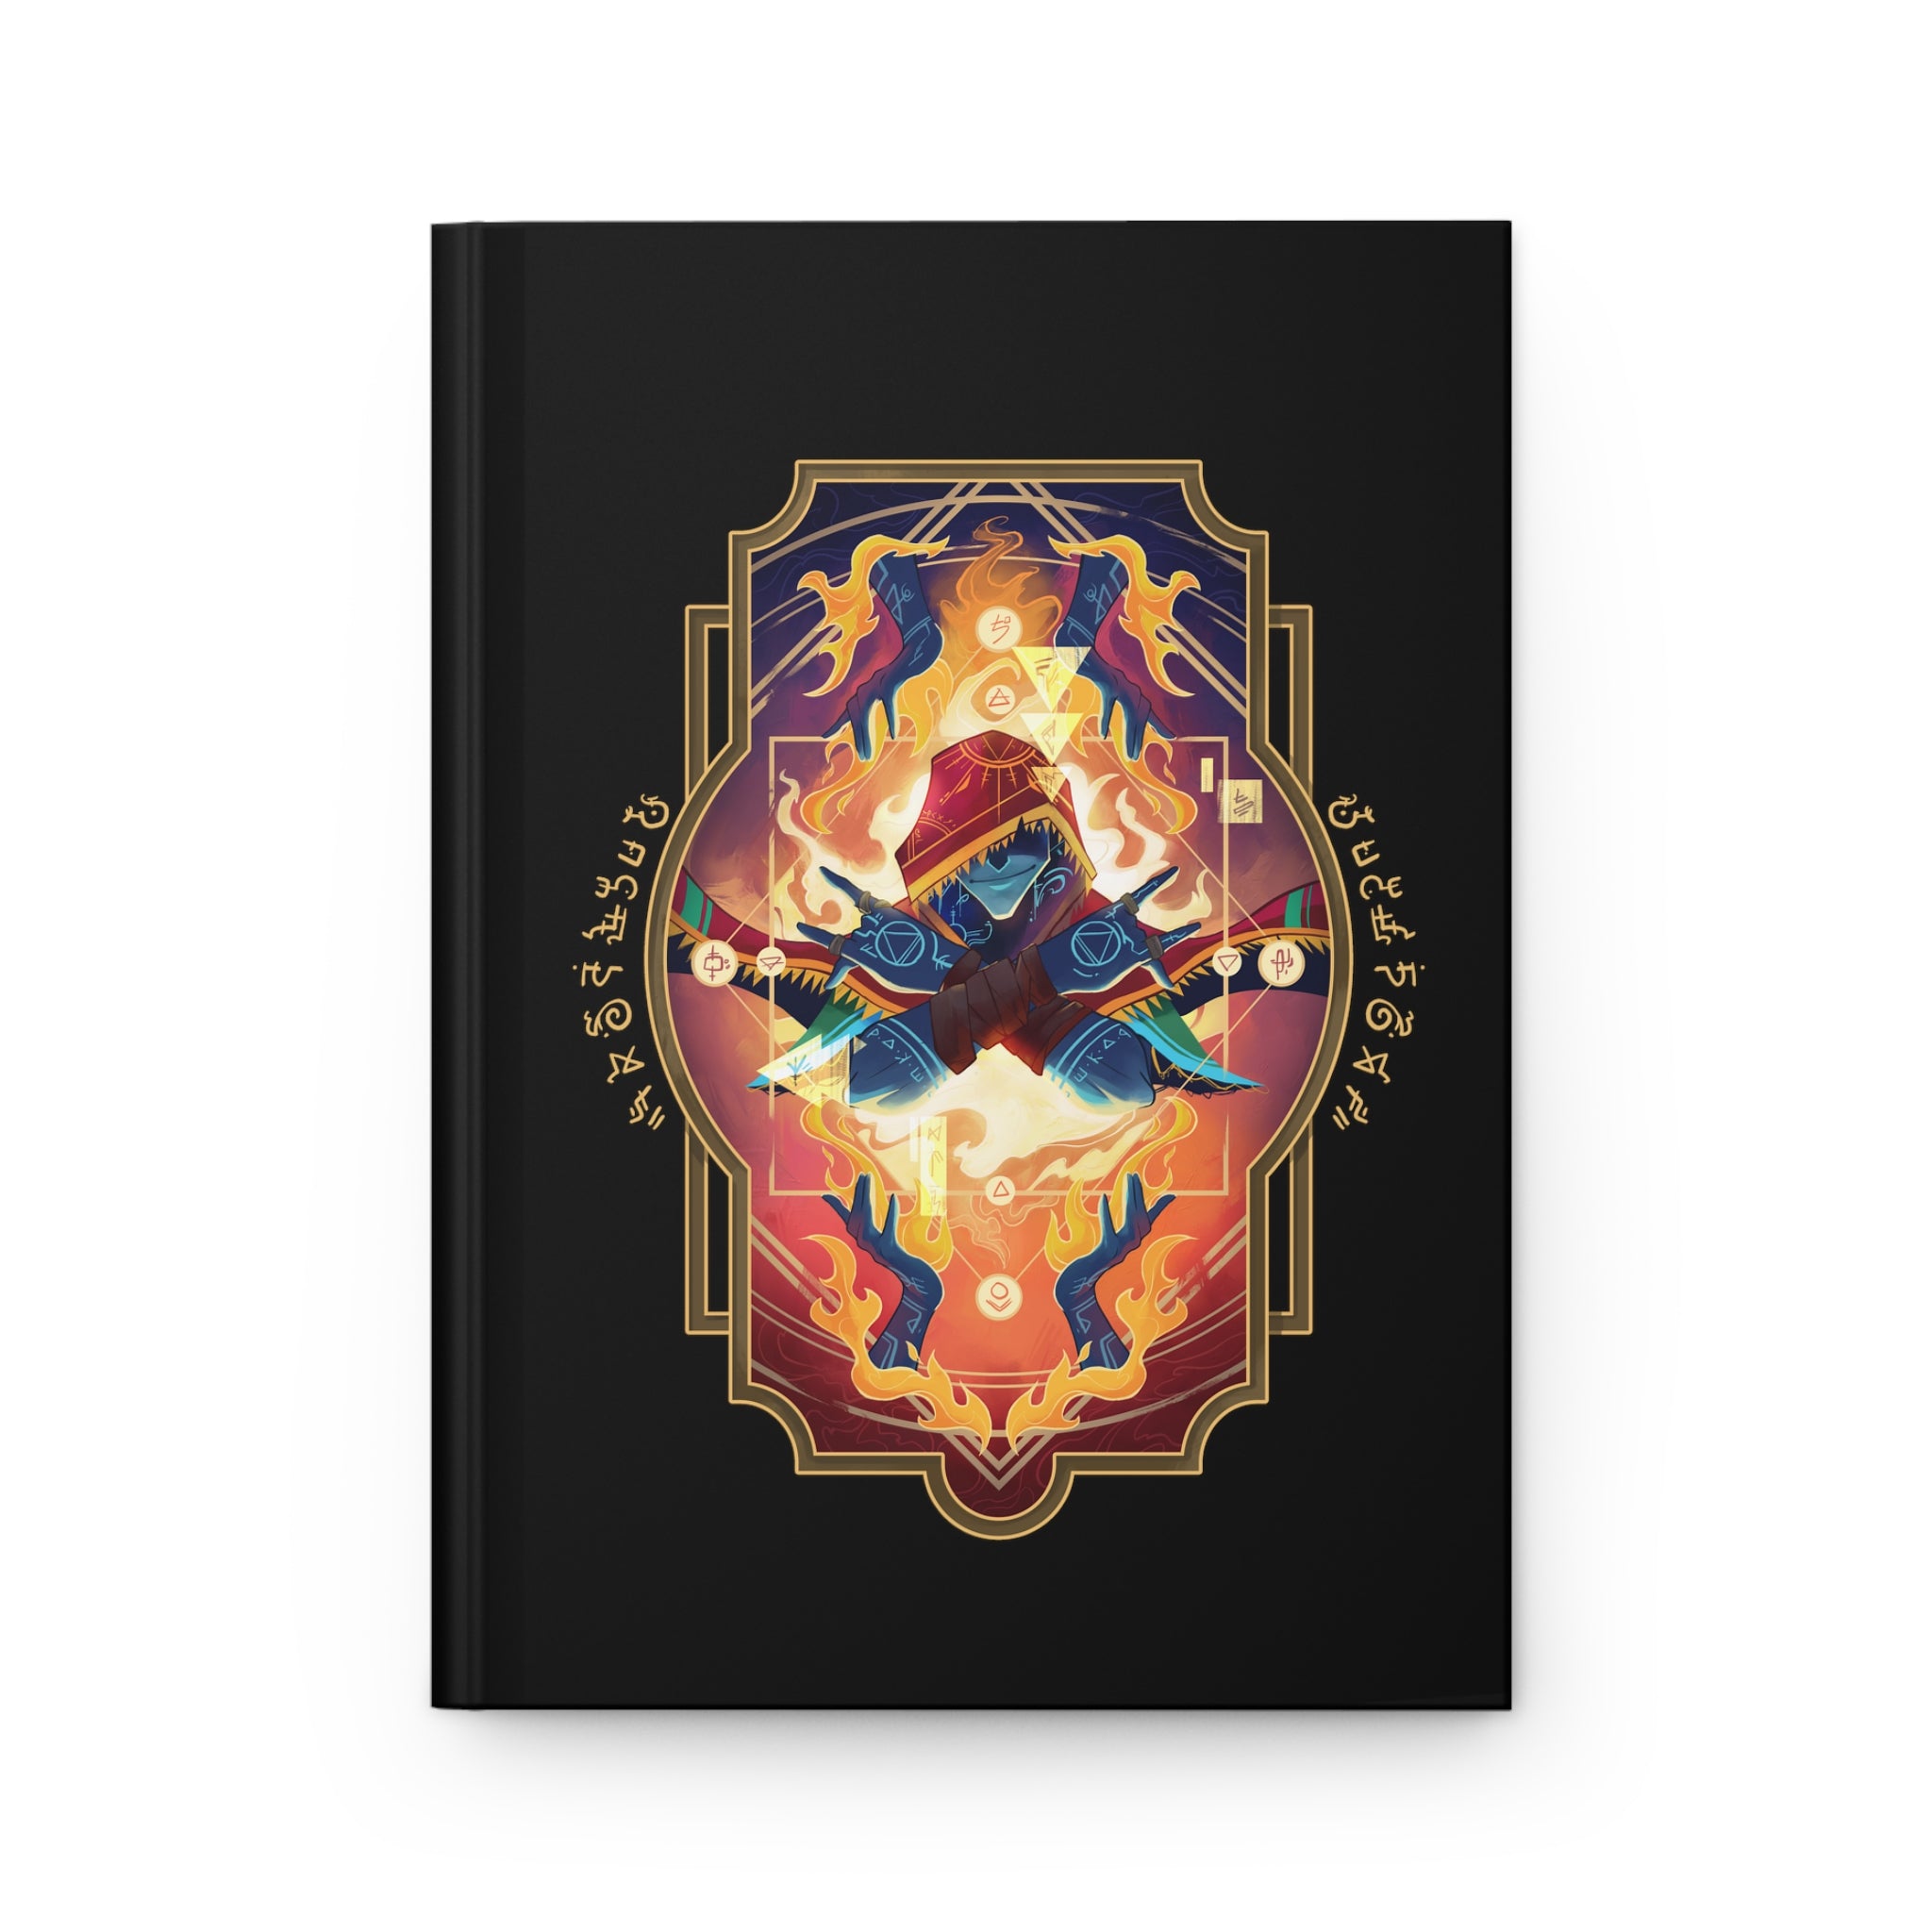 WIZARD CLASS HARDCOVER CAMPAIGN JOURNAL